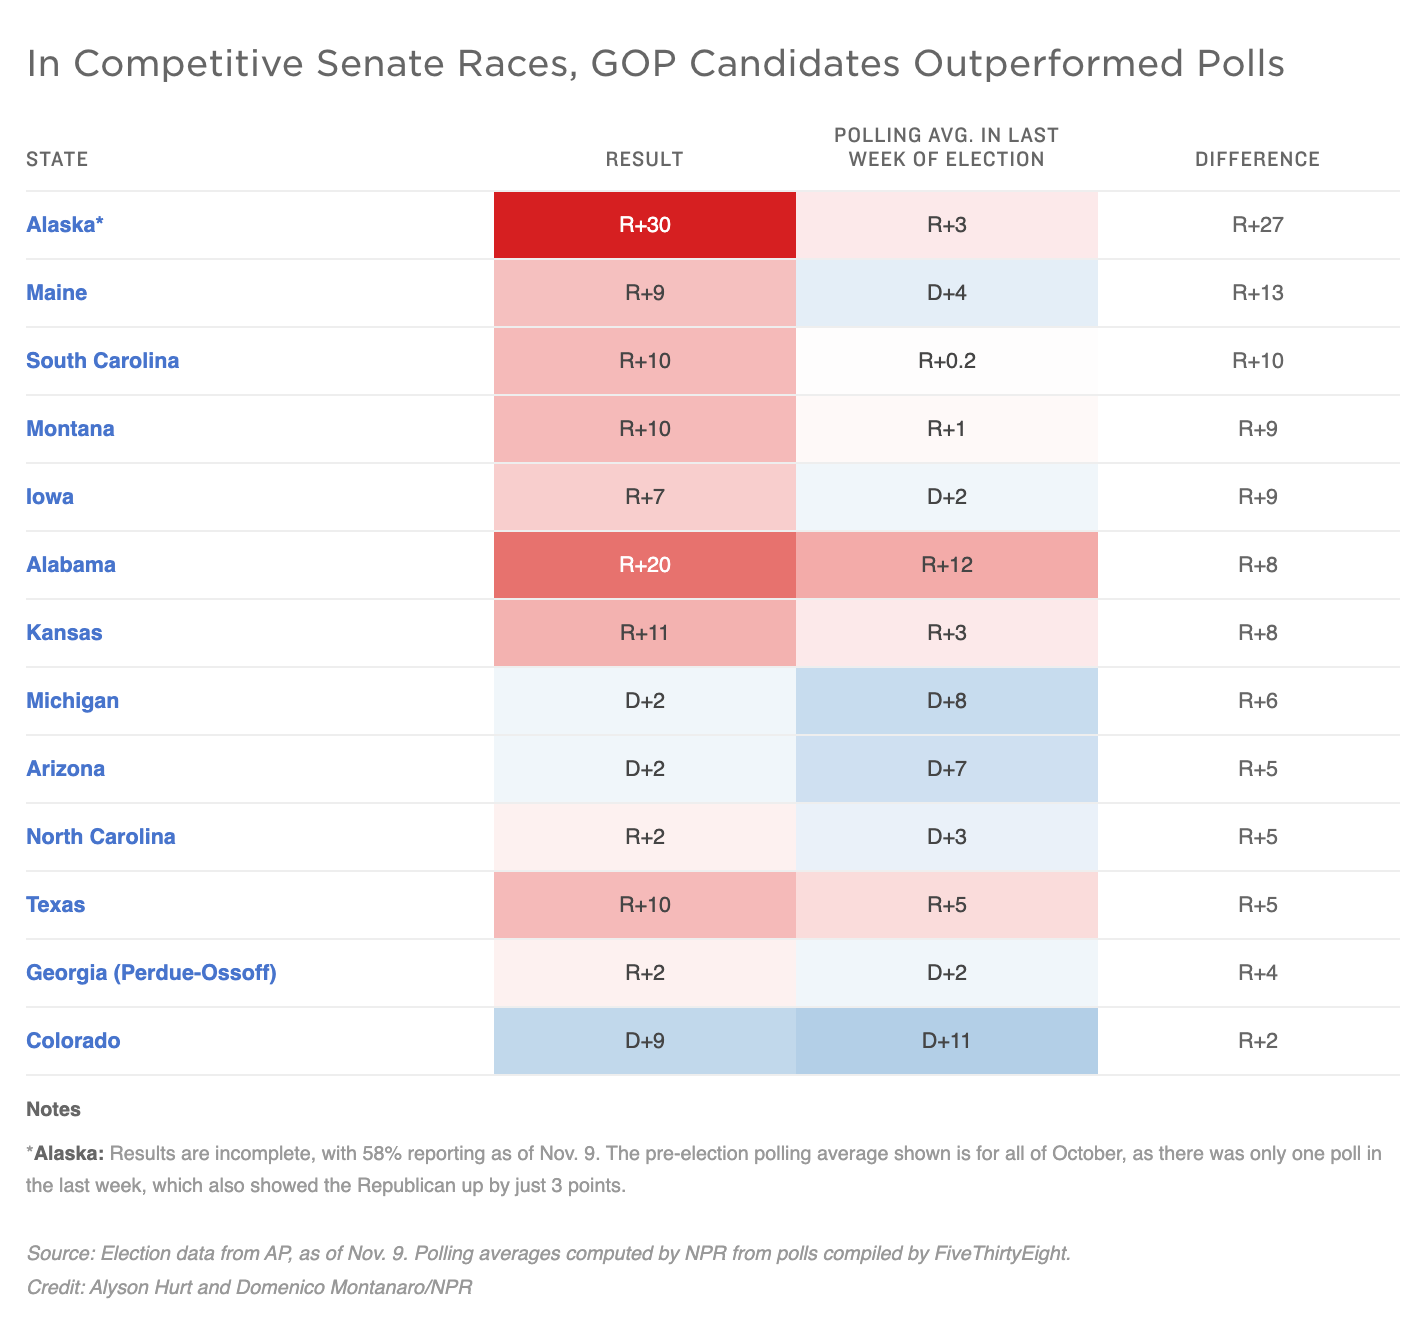 In Competitive Senate Races, GOP Candidates Outperformed Polls